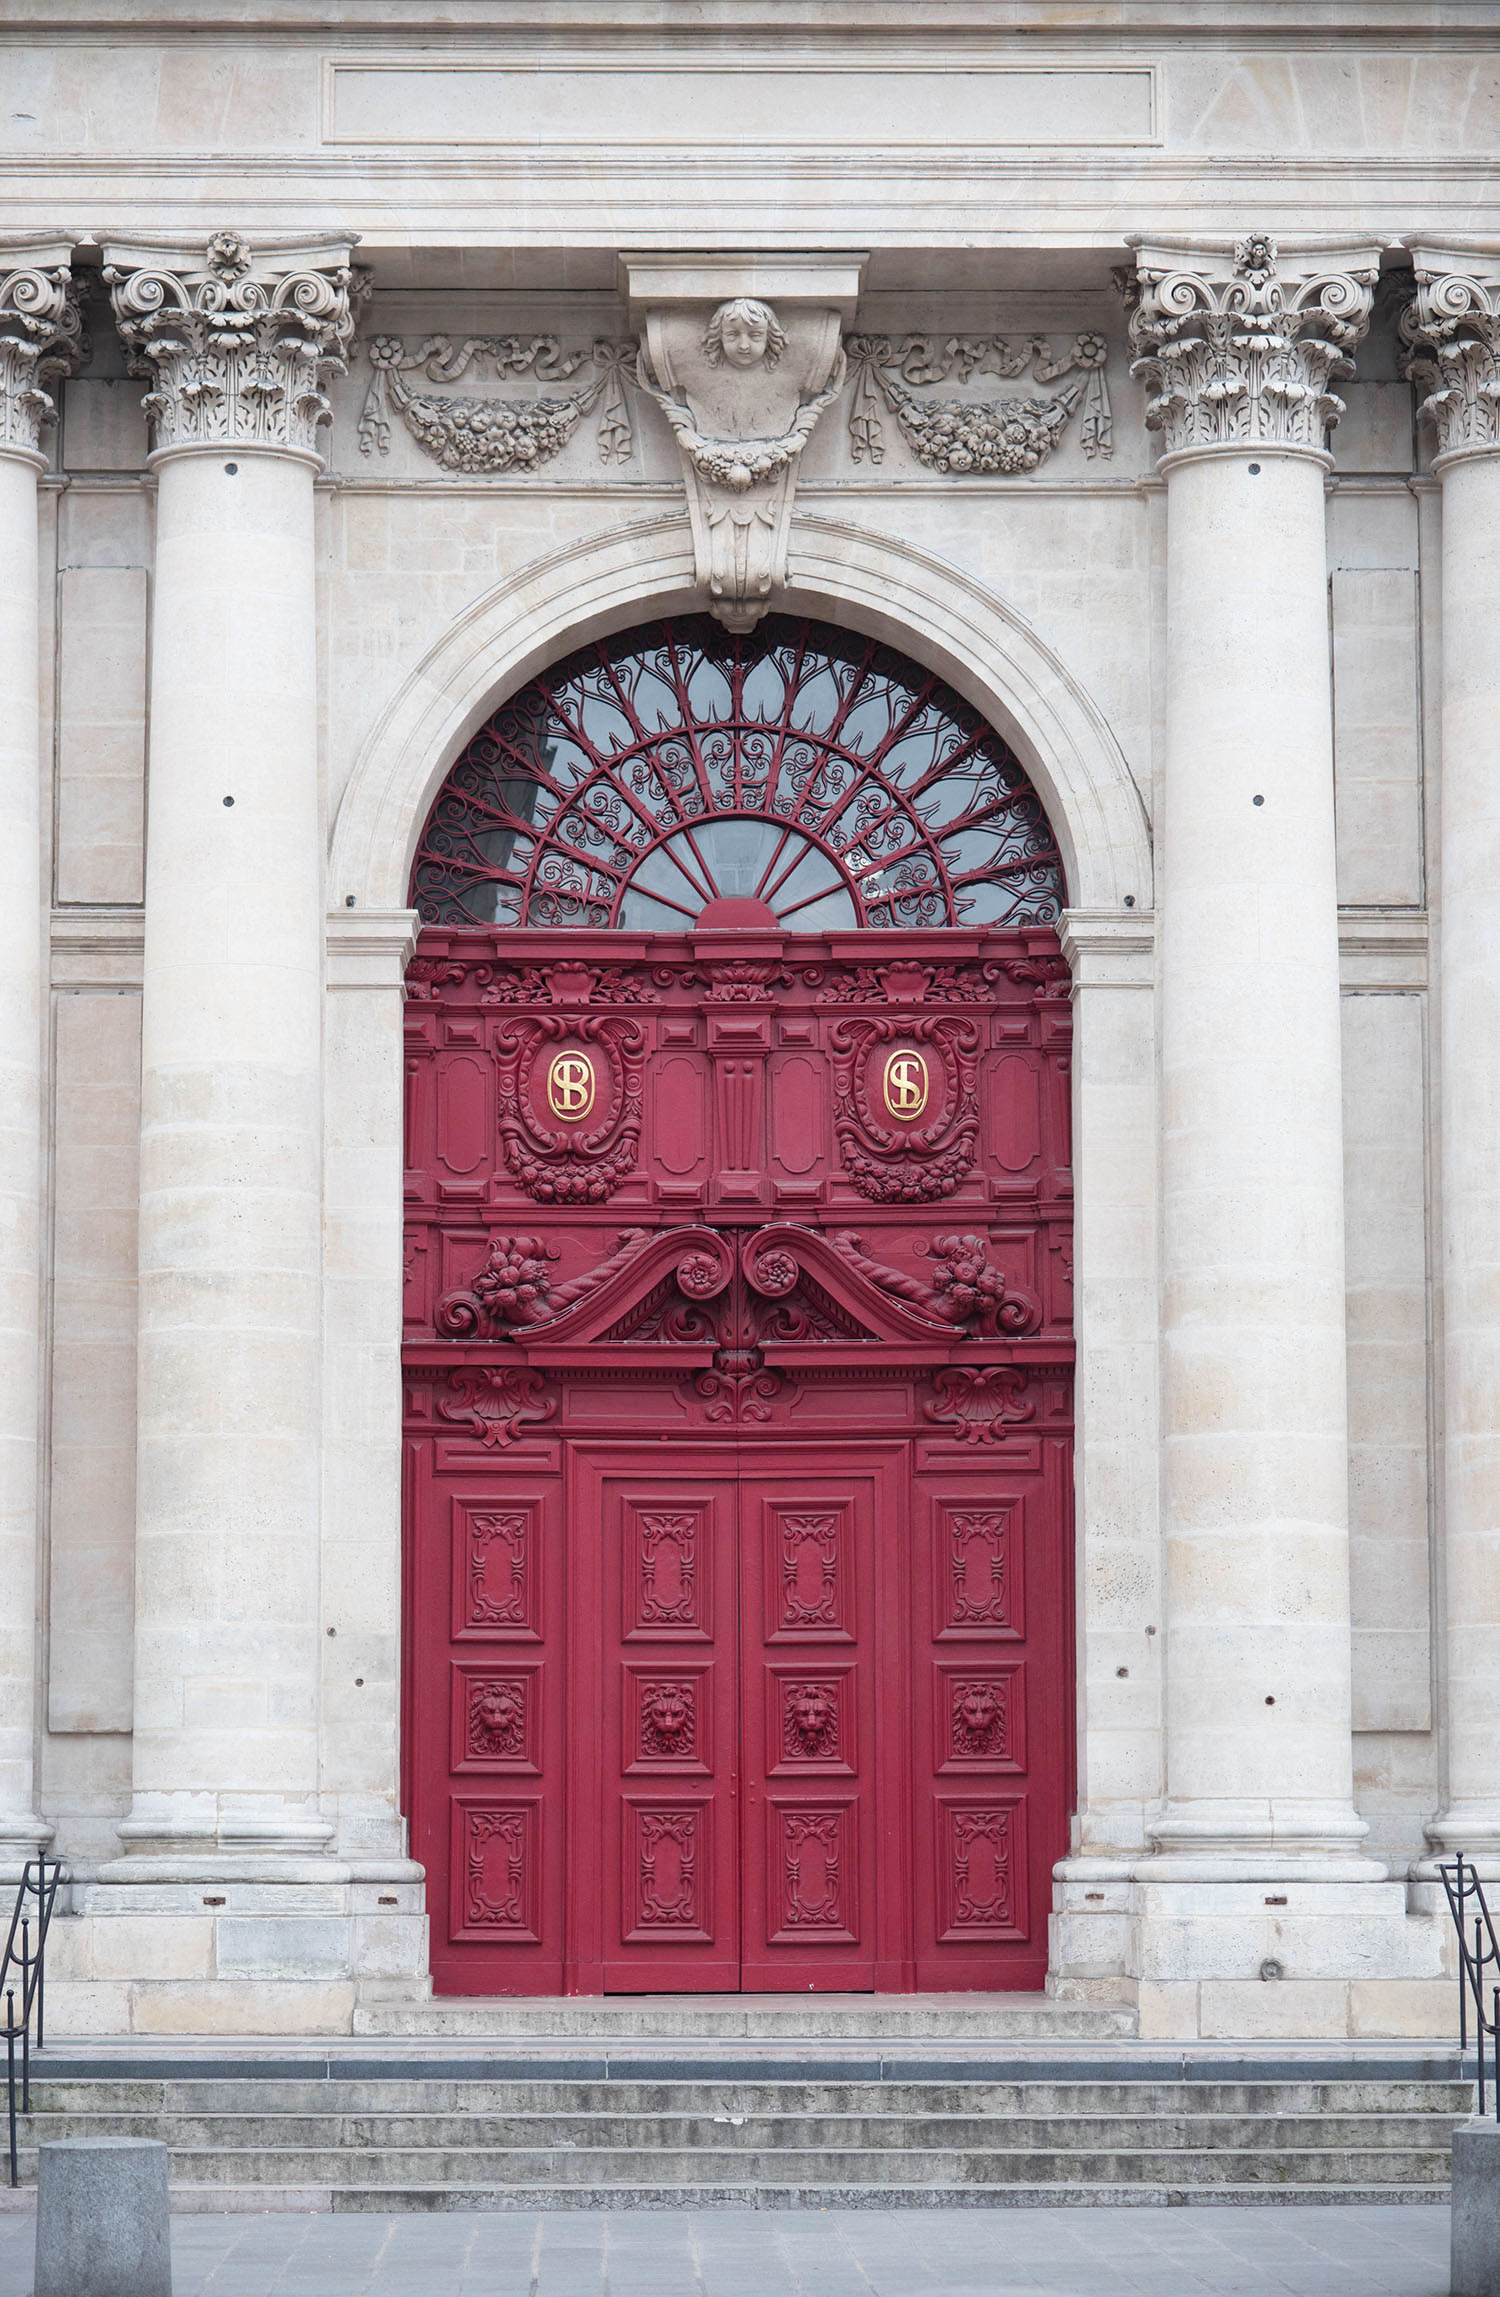 The ornate red door of a cathedral on rue de Rivoli in Paris, as photographed by Winnipeg travel blogger Cee Fardoe of Coco & Vera